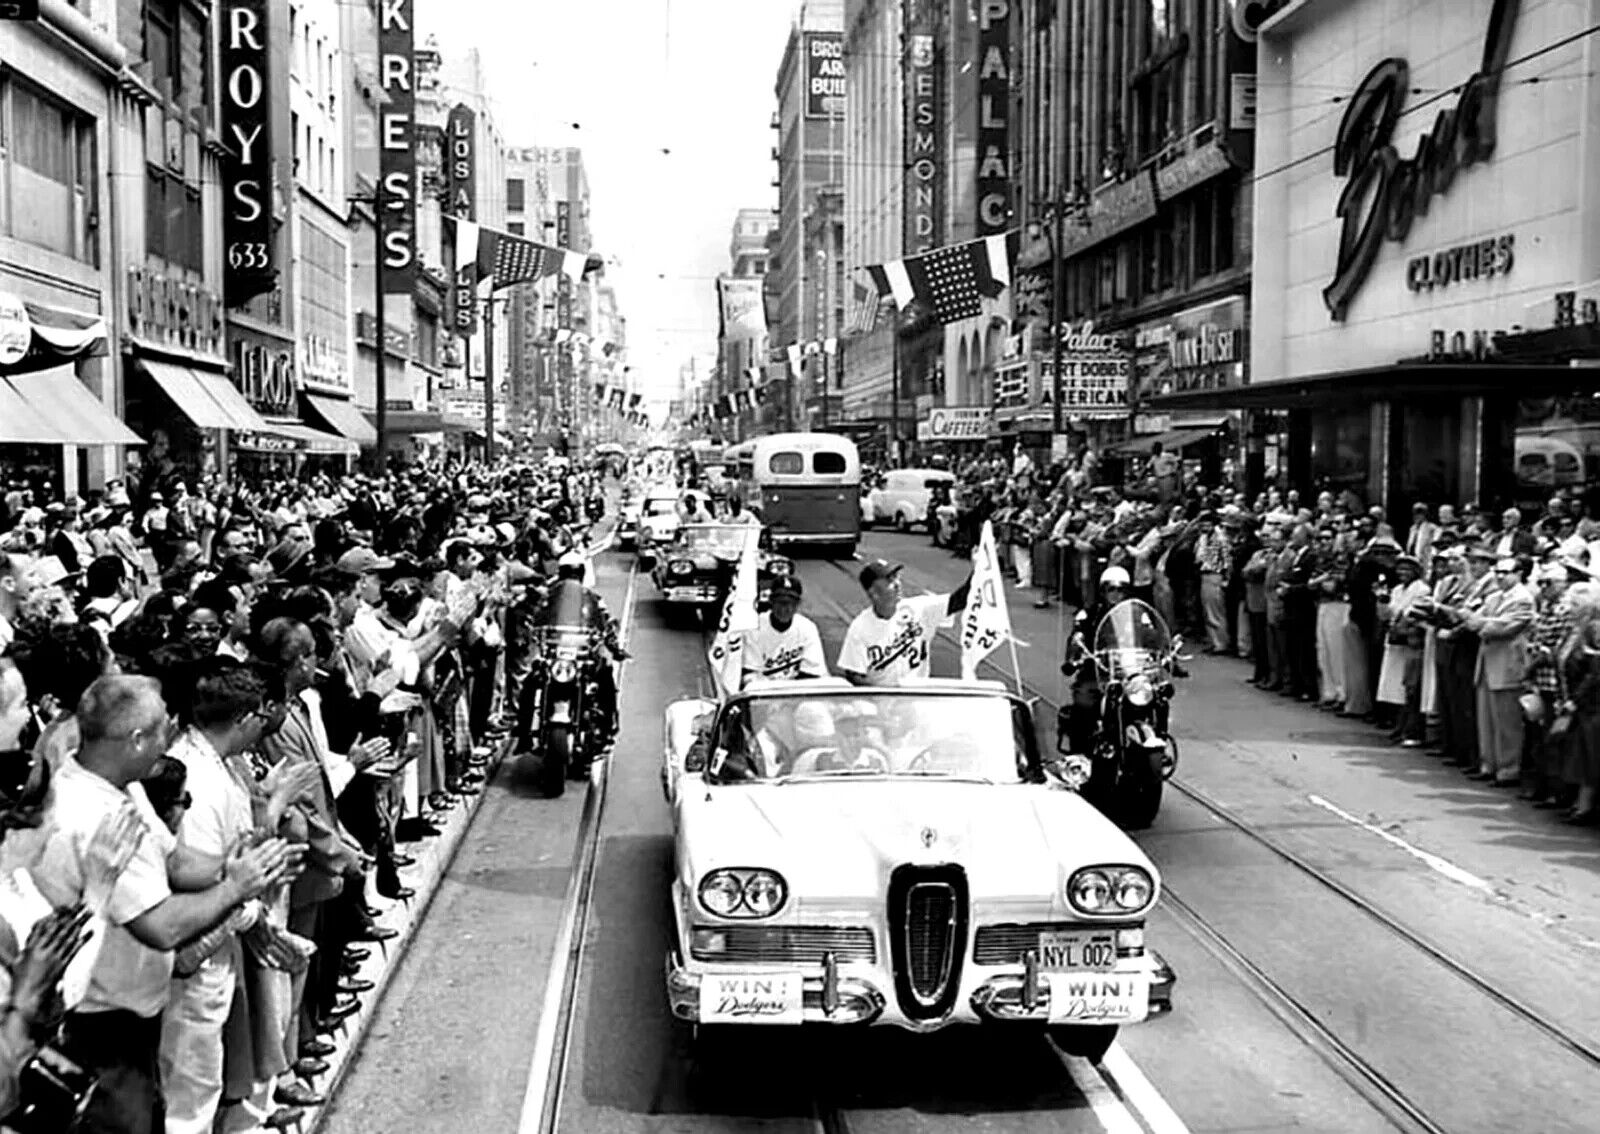 1958 DODGERS Arrival in Los Angeles PARADE Retro Baseball Picture Photo 8x10